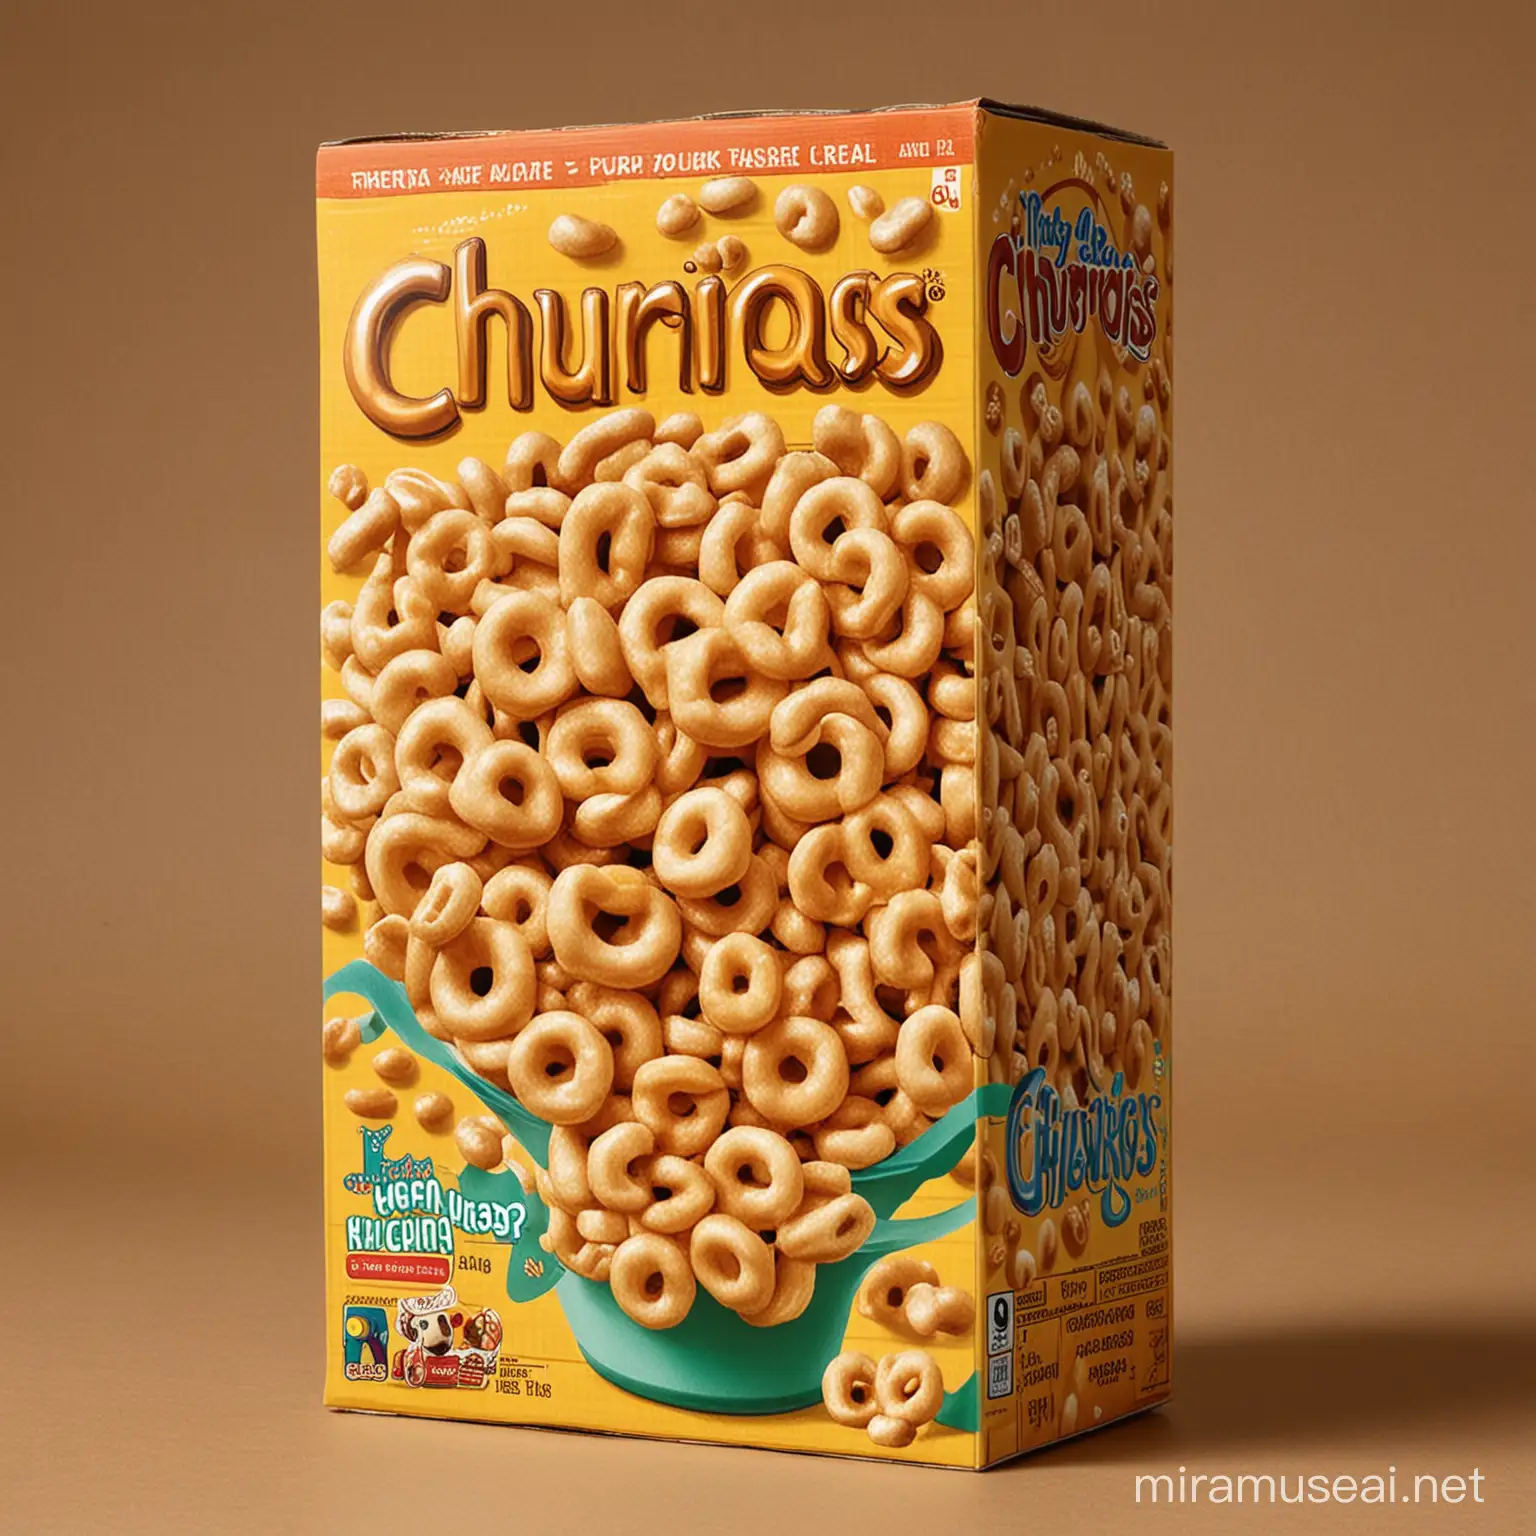 Can you make a cereal box that looks like a Cheerios cereal box and says "Churrios" on it
